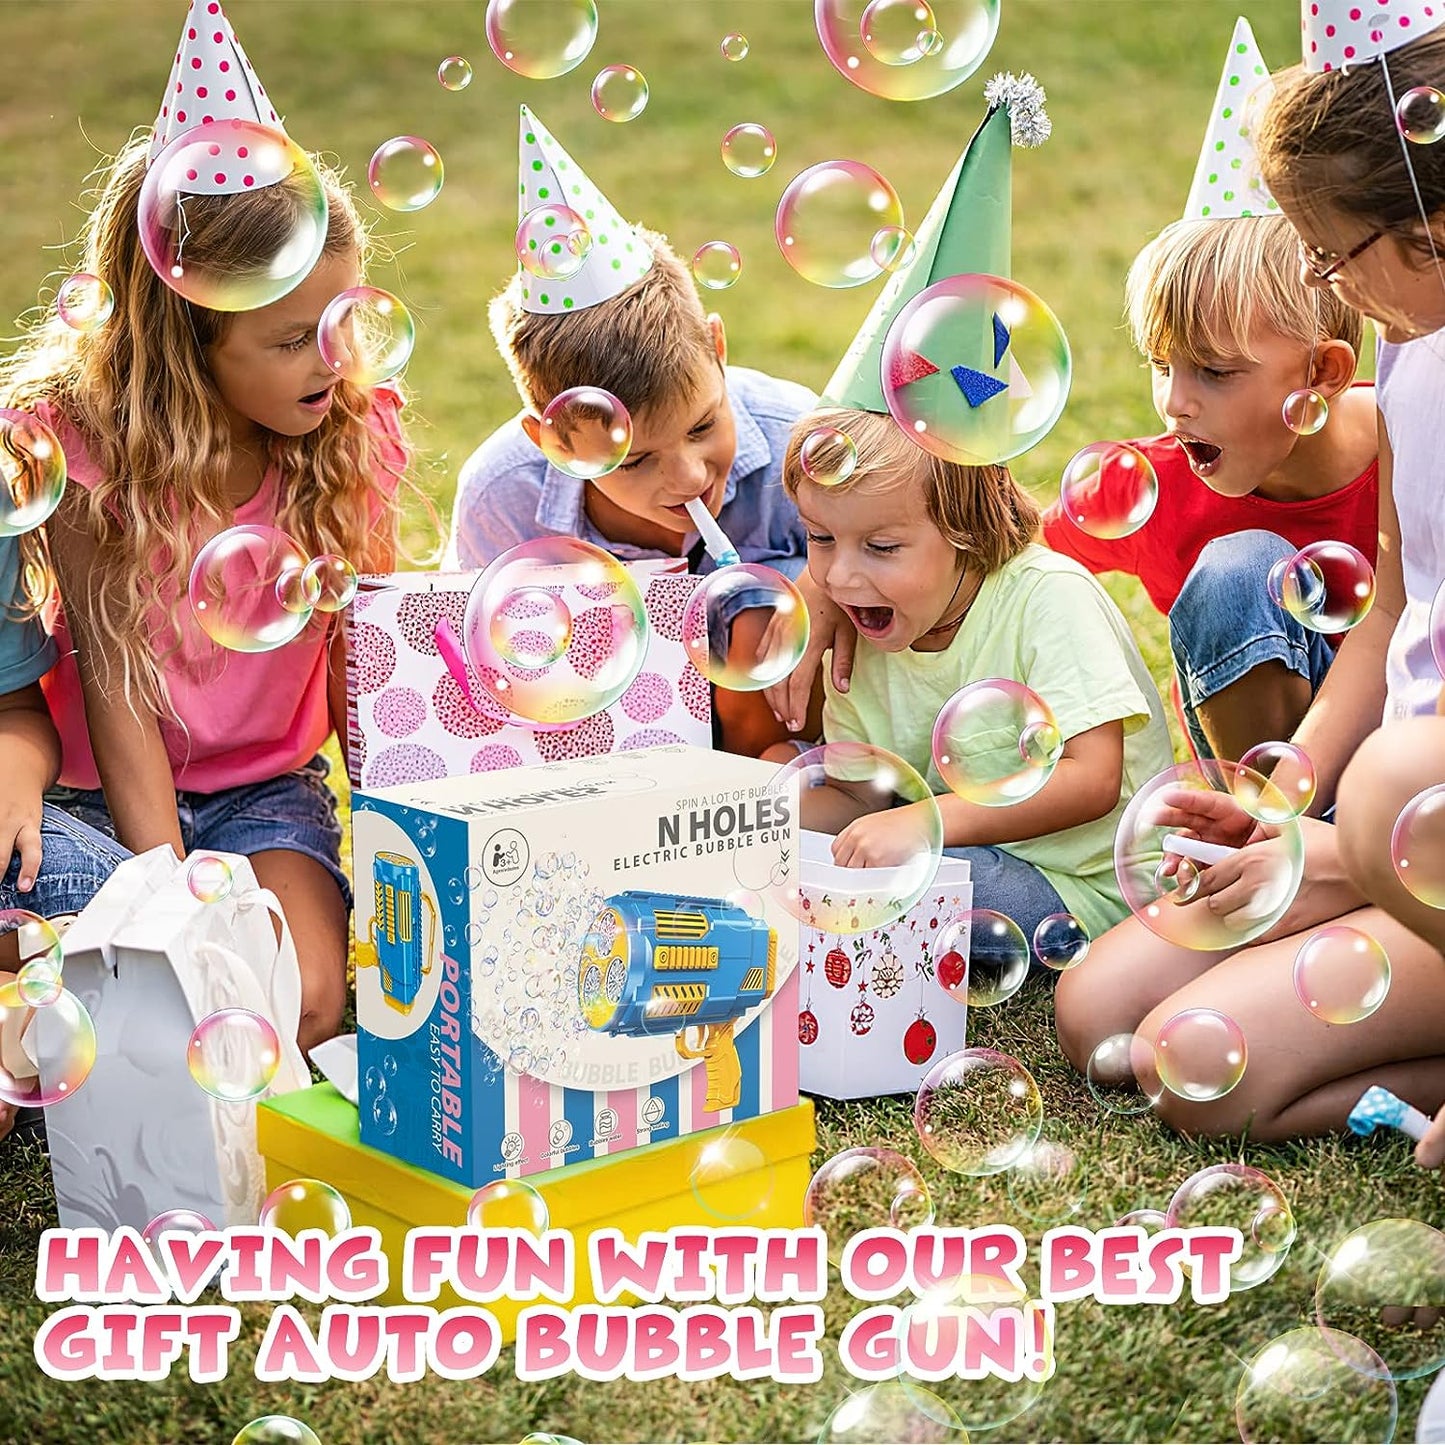 Electric Bubble Gun Machine - Kids Portable Outdoor Party Toy With